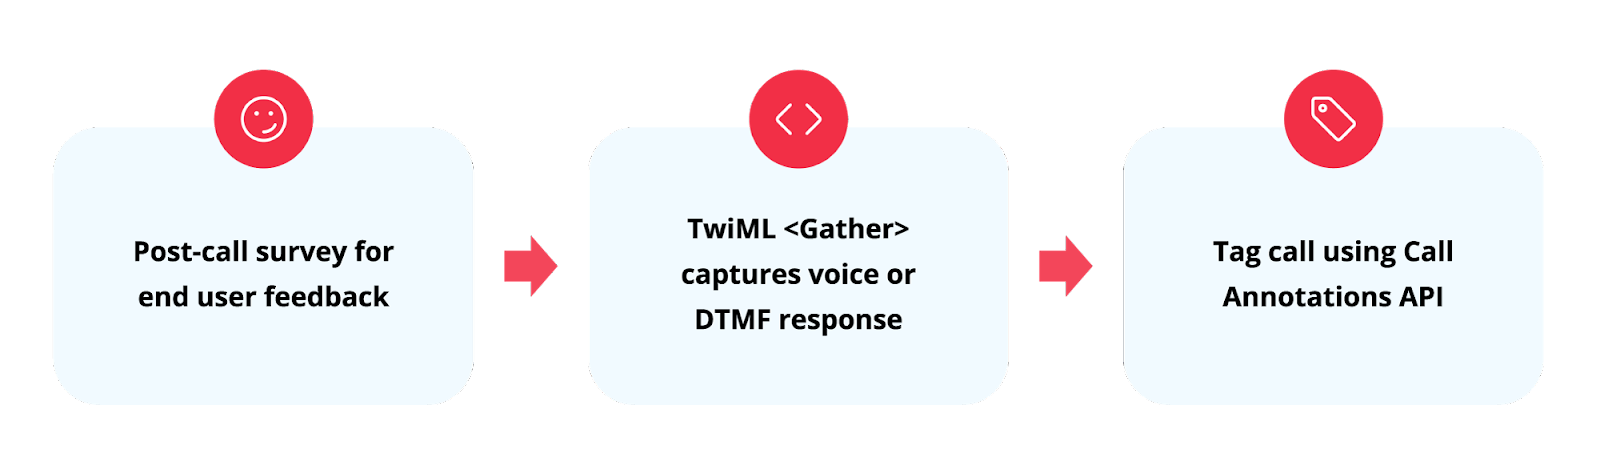 programmable voice and twilio segment real time call feedback line